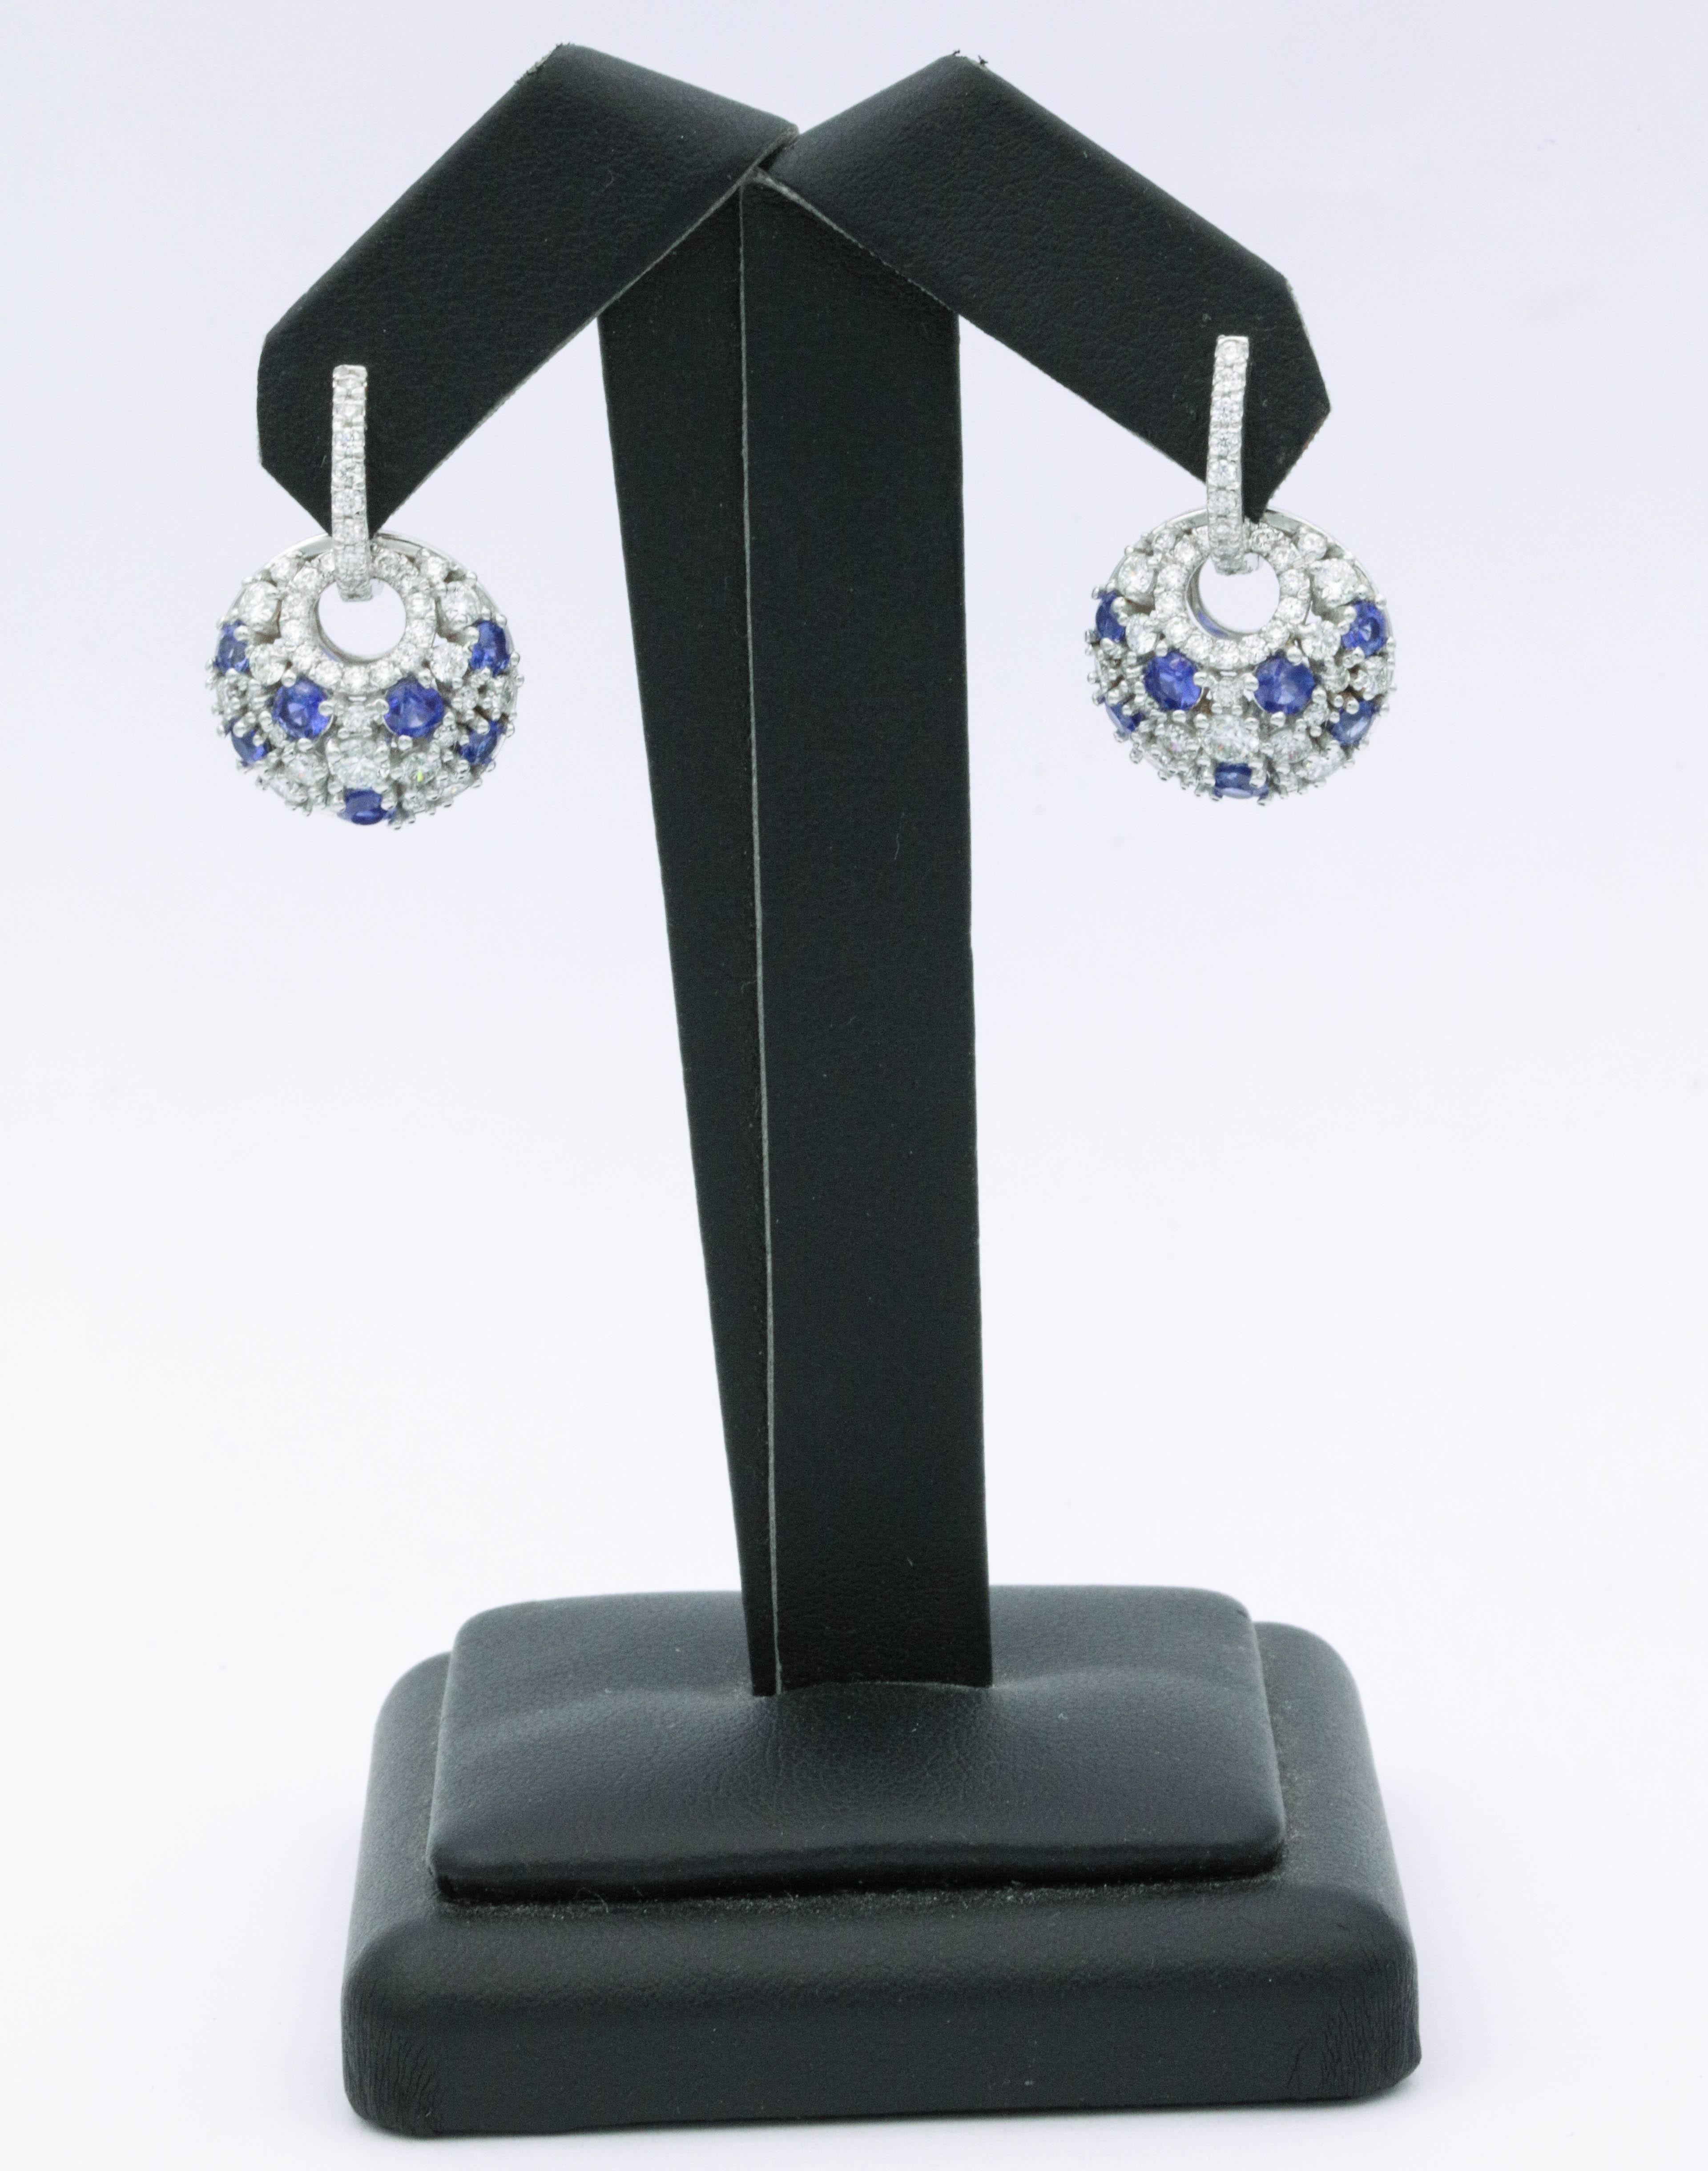 14 Sapphires 1.93 Cts
Diamonds 2.32 Cts. F-G SI 
18K white Gold
The Earring can be used as only Huggies too